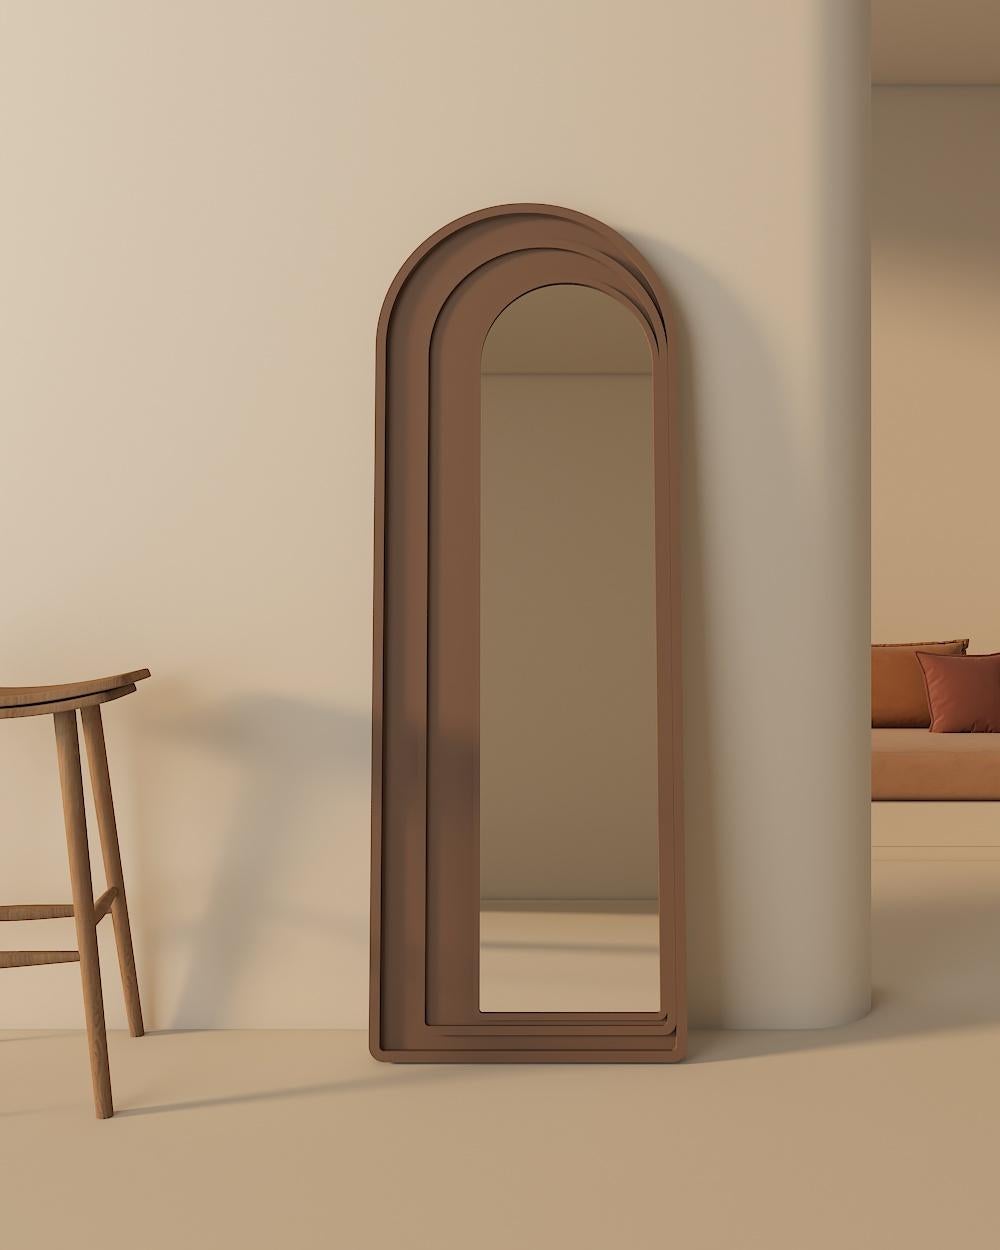 Turkish Pastel Brown Modernist Lacquered Mirror For Sale